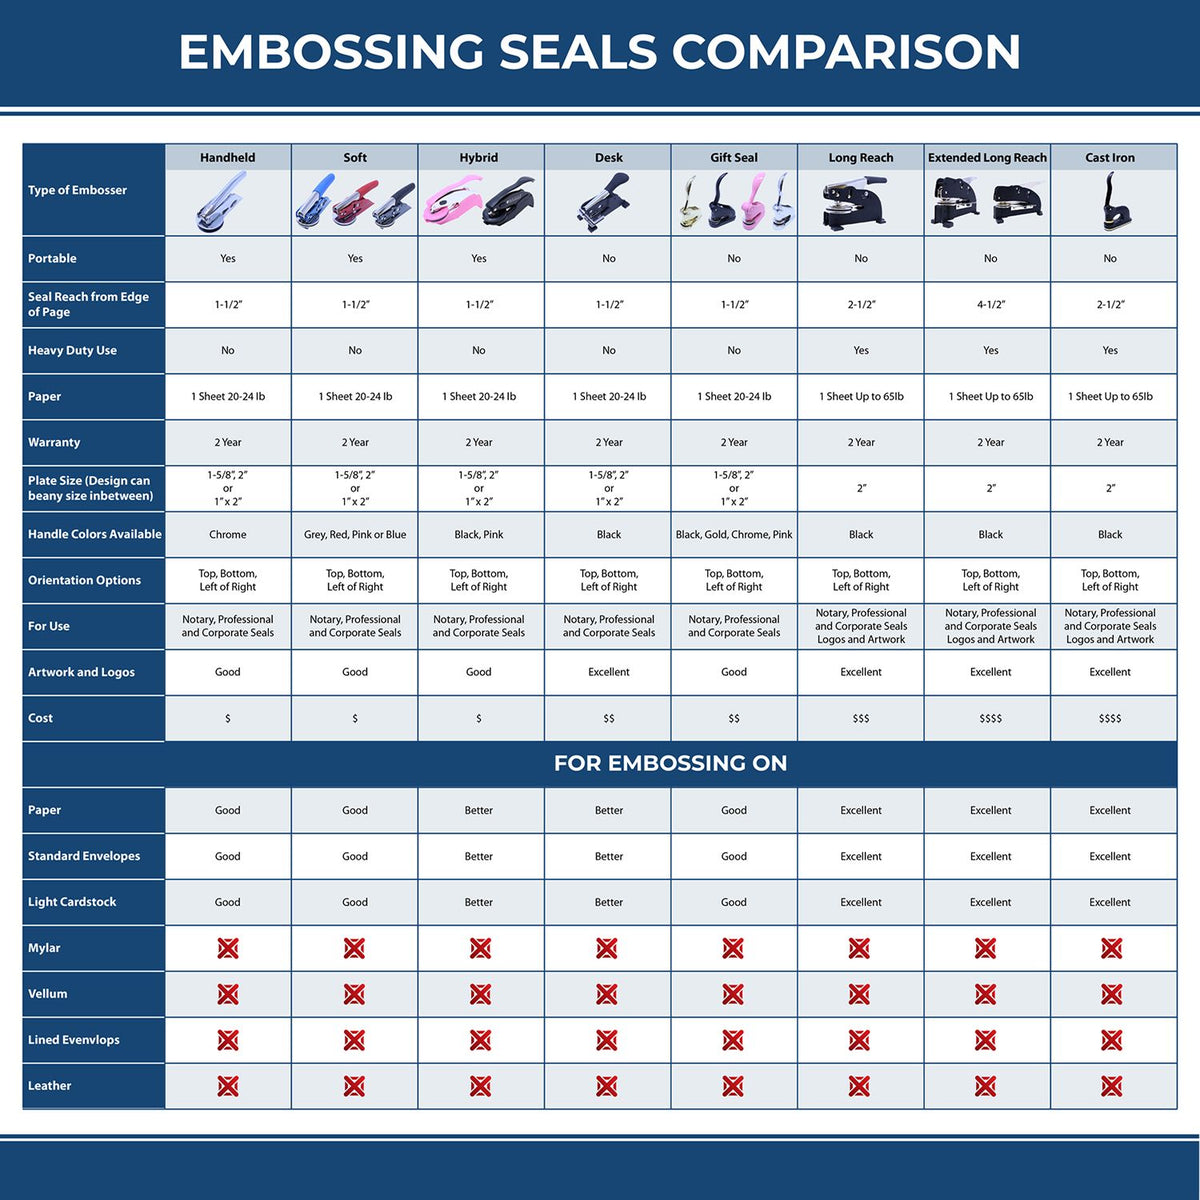 A comparison chart for the different types of mount models available for the Missouri Desk Architect Embossing Seal.